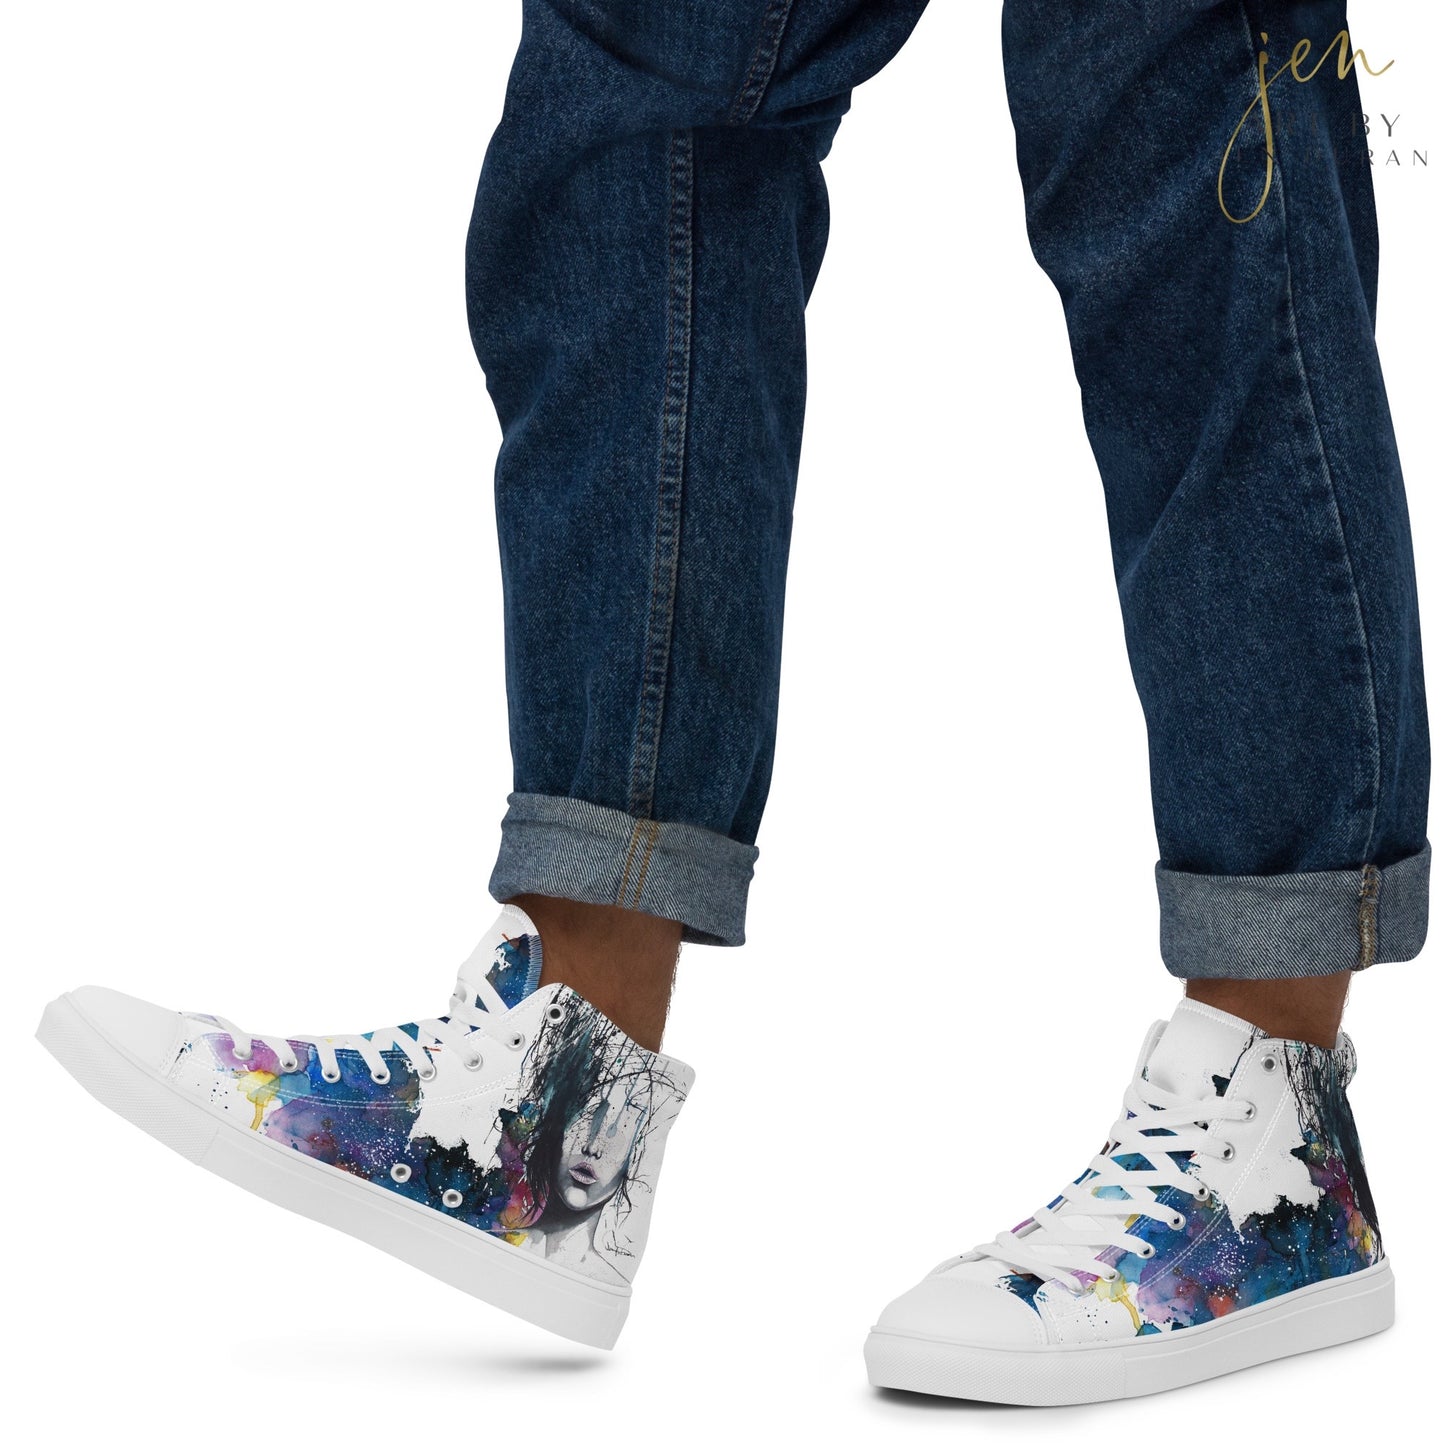 high top shoes, high top sneakers, canvas shoes, trendy shoes, watercolor design, popular shoes, unique shoe design, mens shoes, womens shoes, trendy fashion, consumed by chaos, art by jen duran